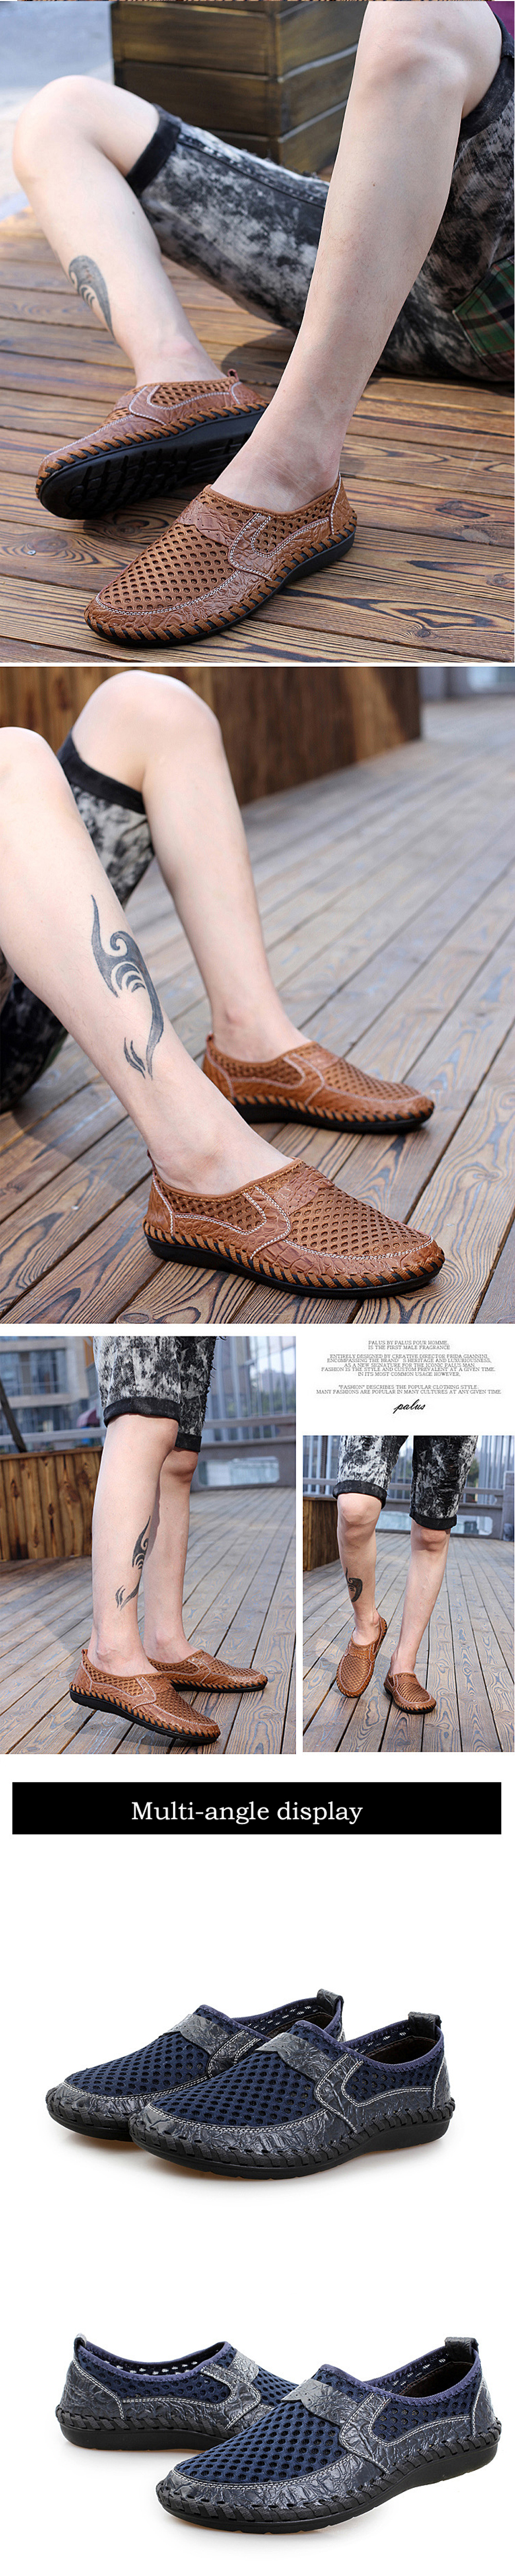 Summer New Mesh Shoes Leather Plus Mesh Men'S Breathable Casual Shoes Trend Handmade Shoes